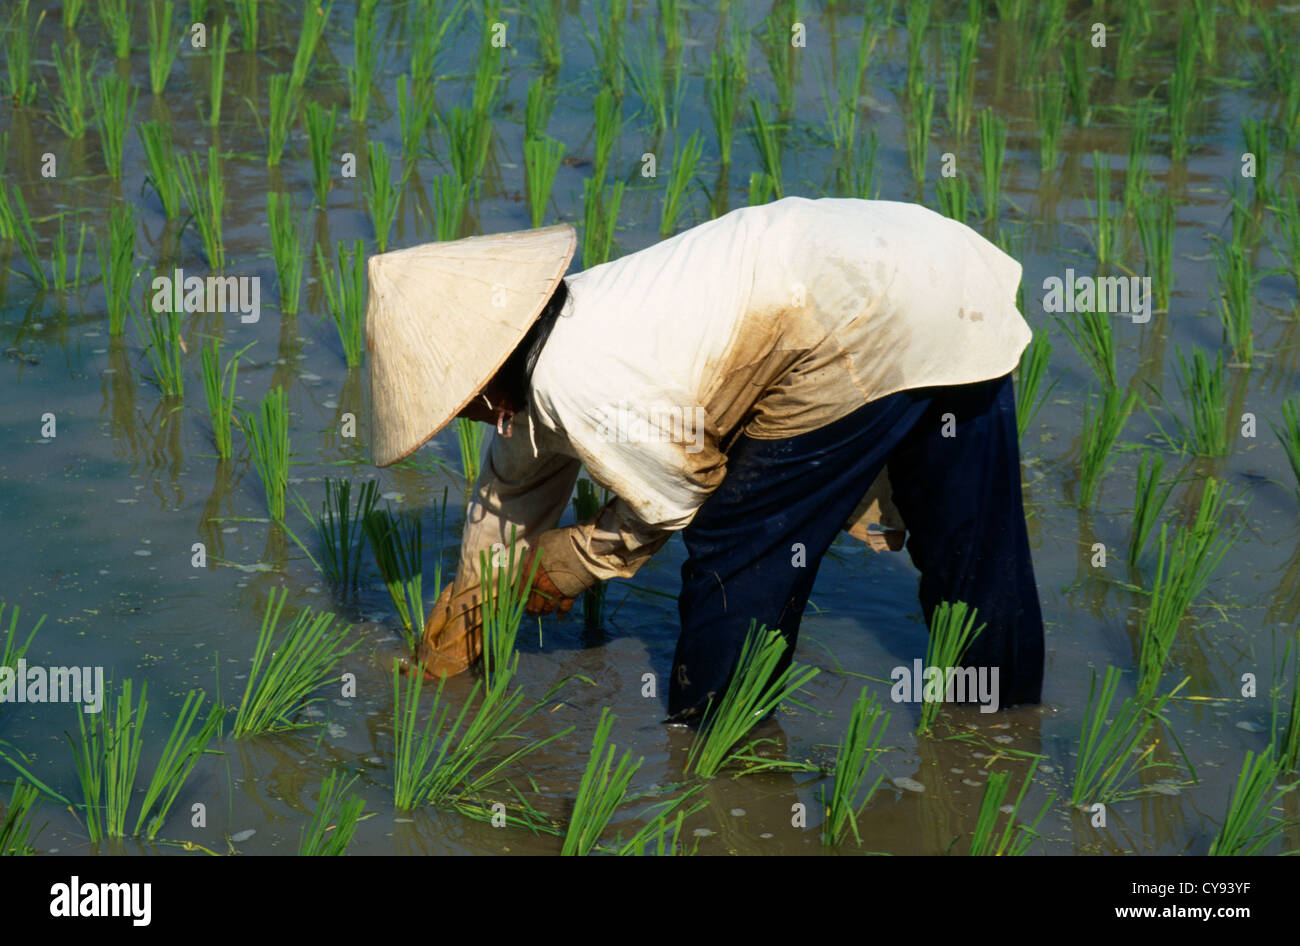 Malaysia Langkawi Oryza Sativa Rice Female Worker Wearing Conical Straw Hat Planting Seedlings In A Paddy Field Stock Photo Alamy